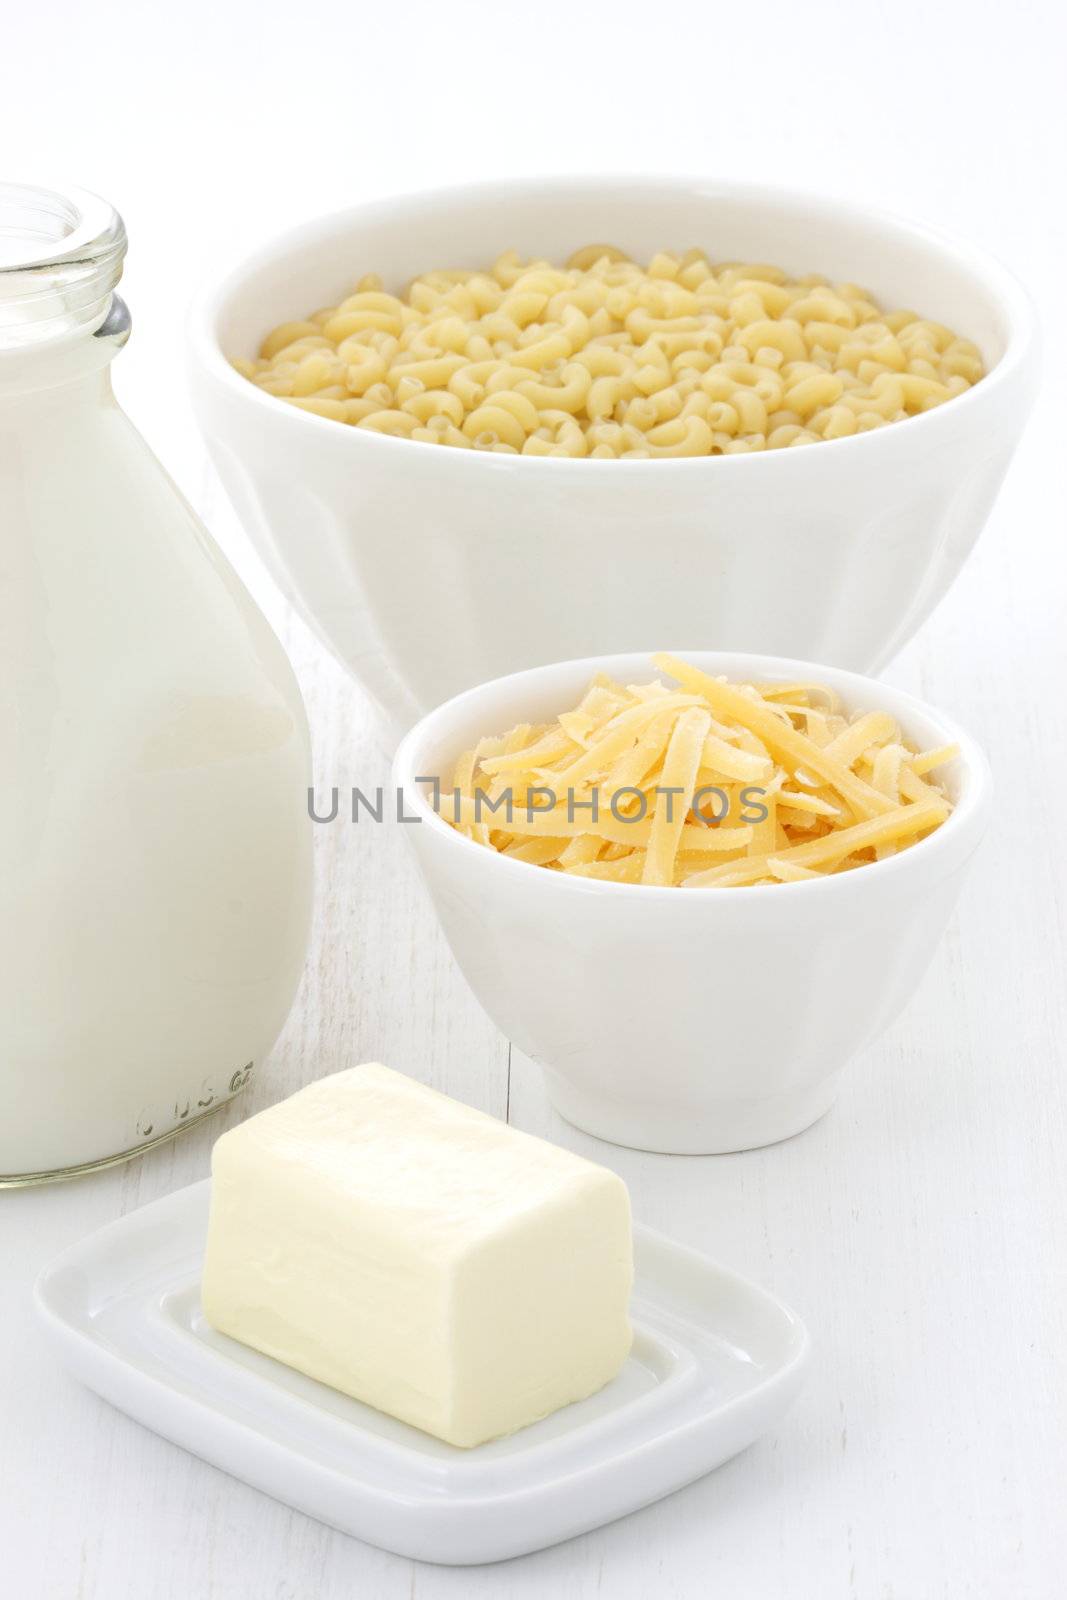 Delicious macaroni and cheese ingredients with a smooth milk cream, fine bread crumbs and aged cheddar cheese. Almost every kid and adult will love it at once. 